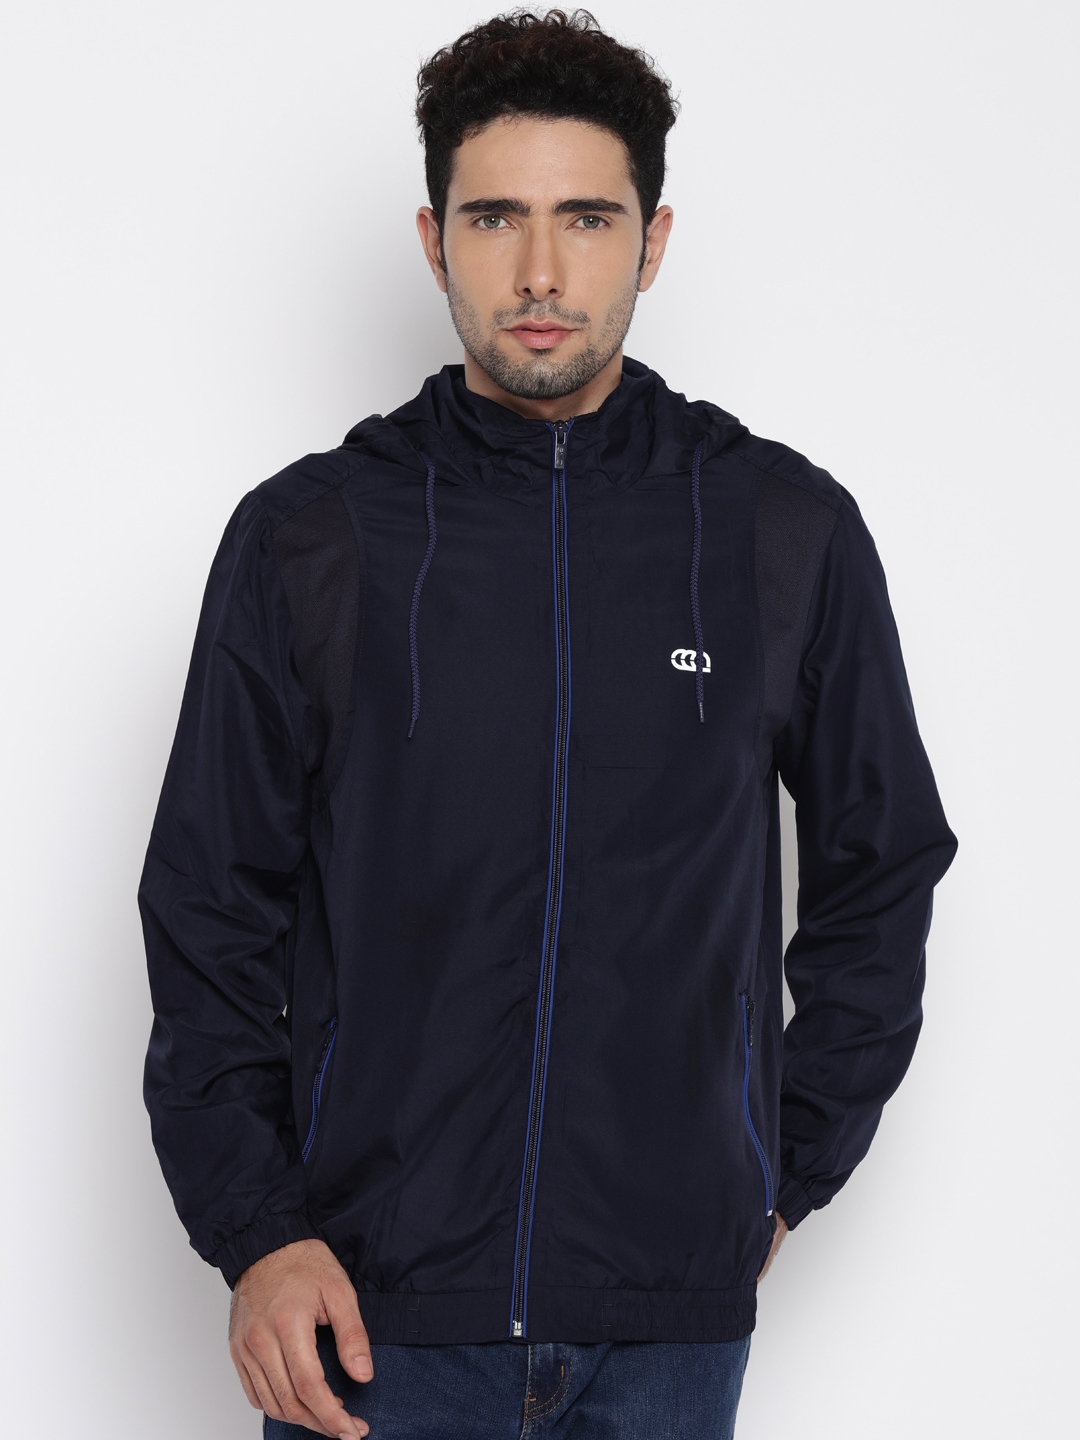 Buy Ajile By Pantaloons Navy Hooded Jacket - Jackets for Men 1611754 ...